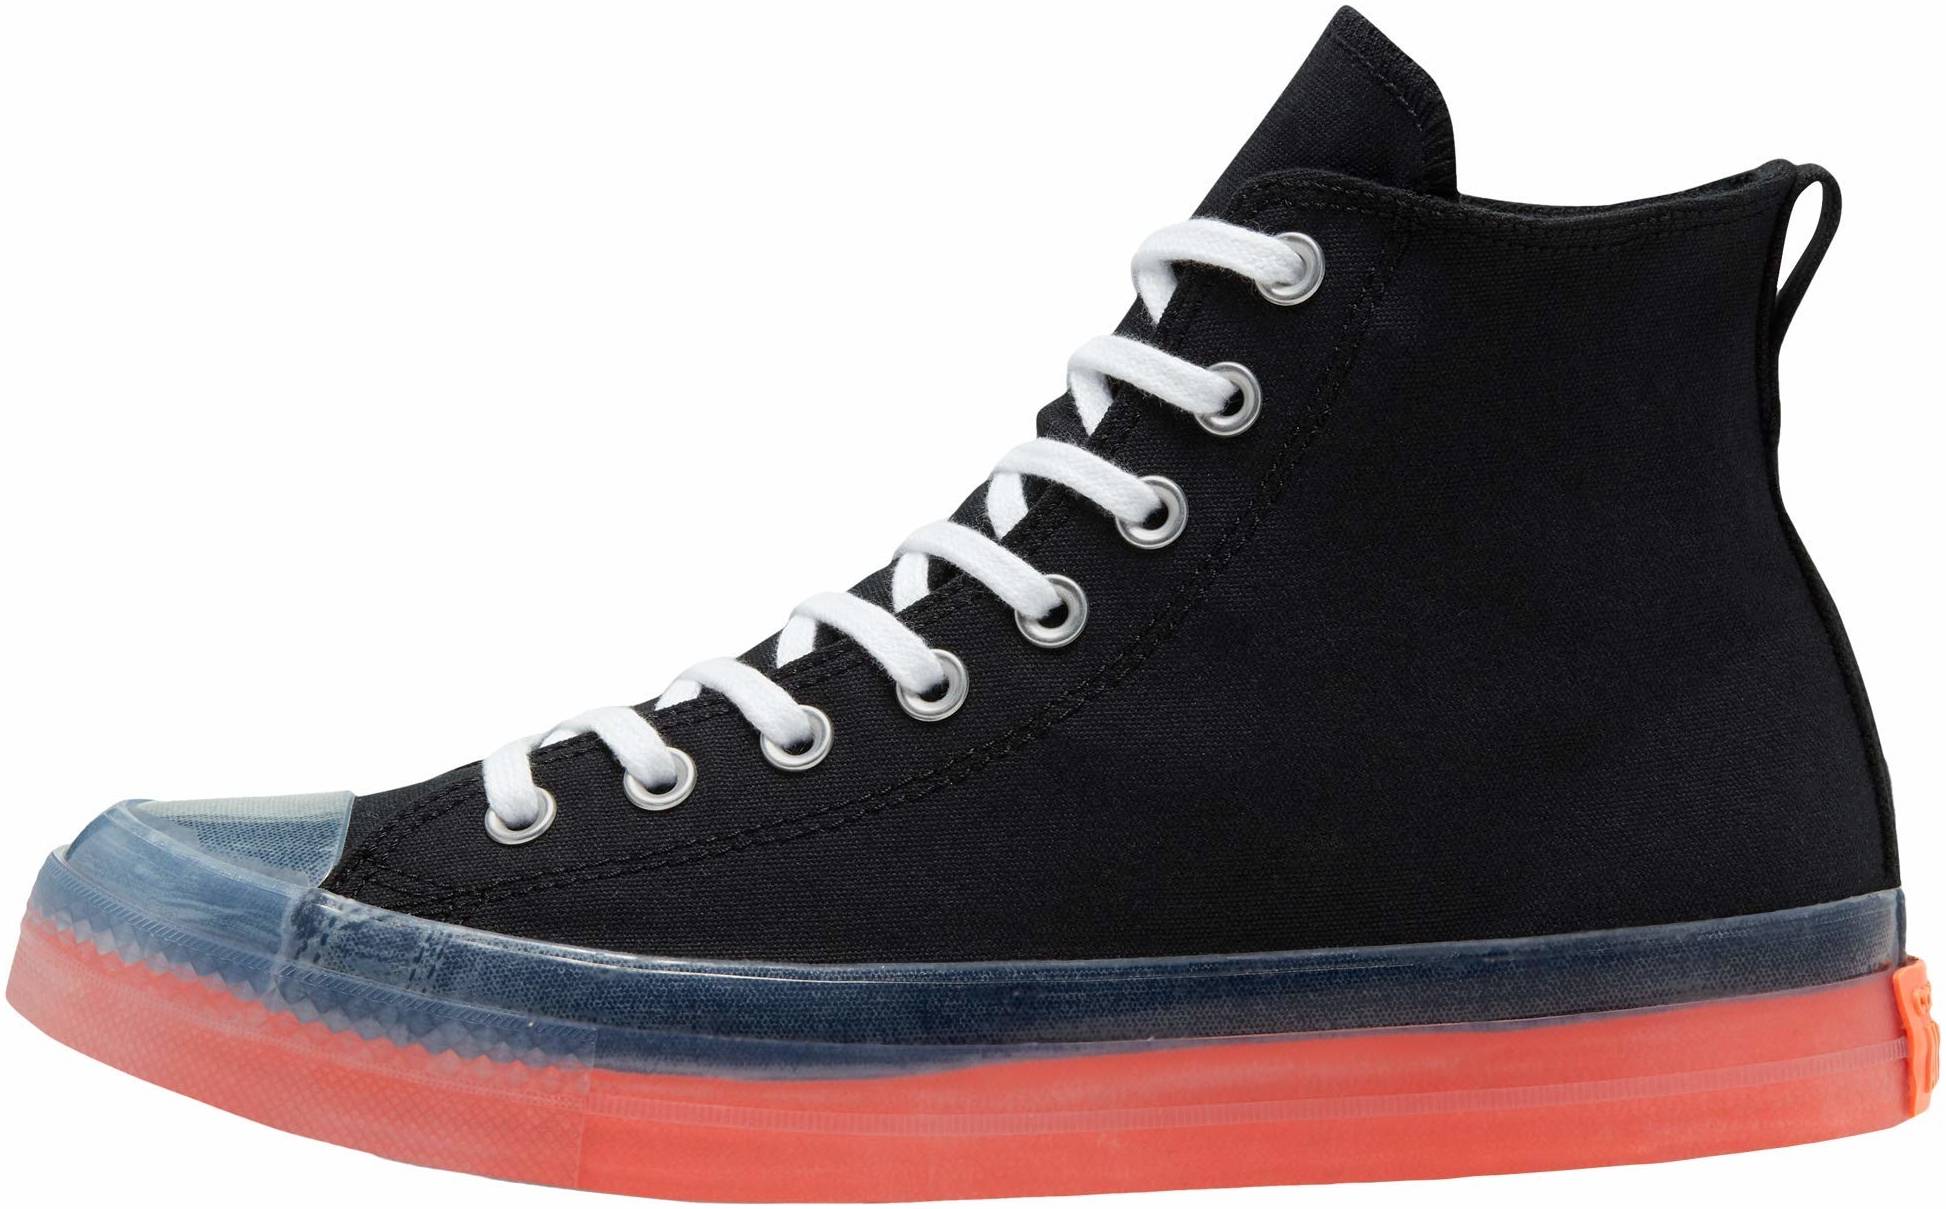 Converse Chuck Taylor All Star CX High Top sneakers in 8 colors (only $58)  | RunRepeat